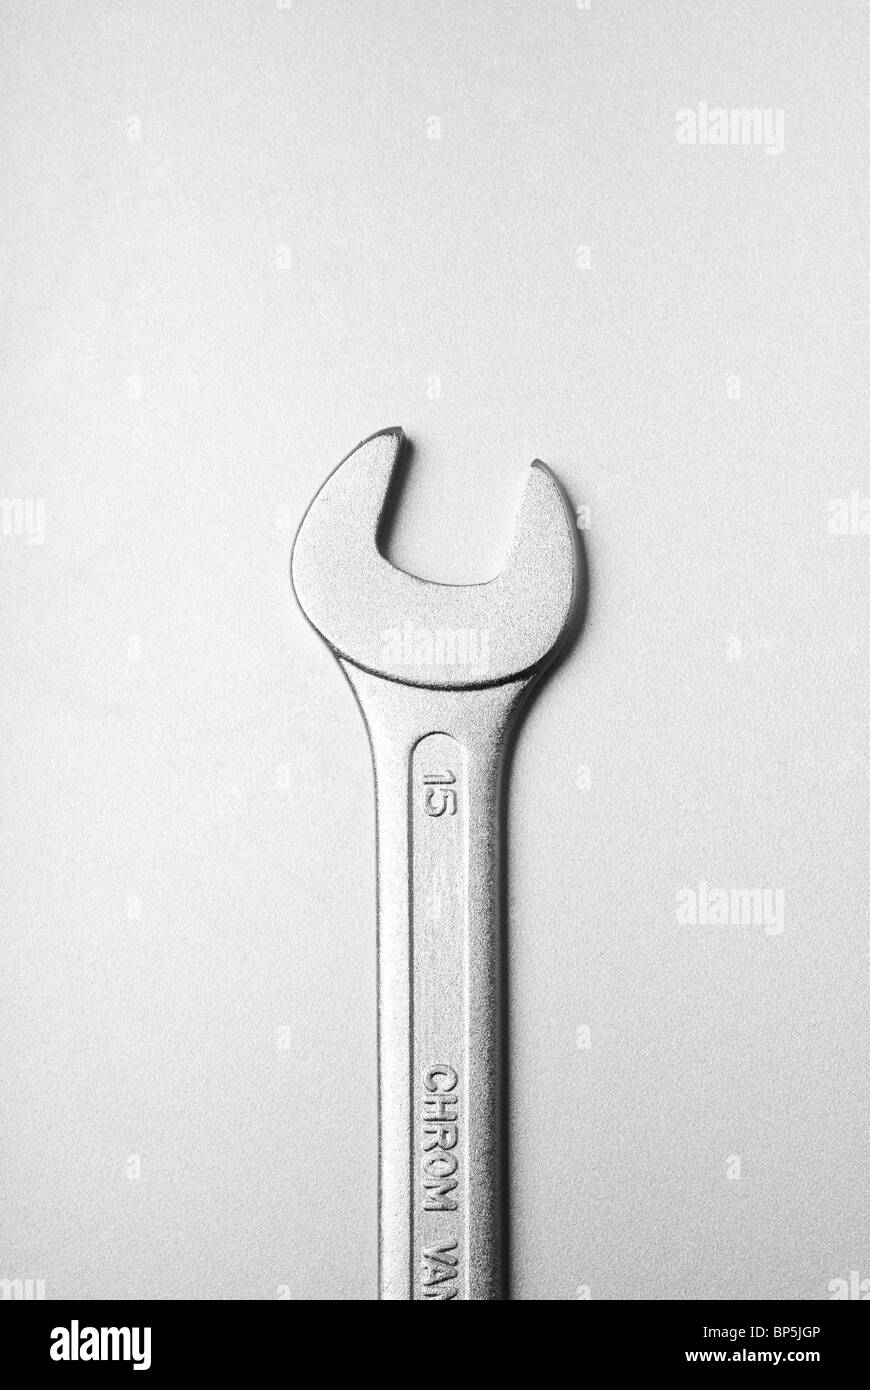 a wrench tool Stock Photo